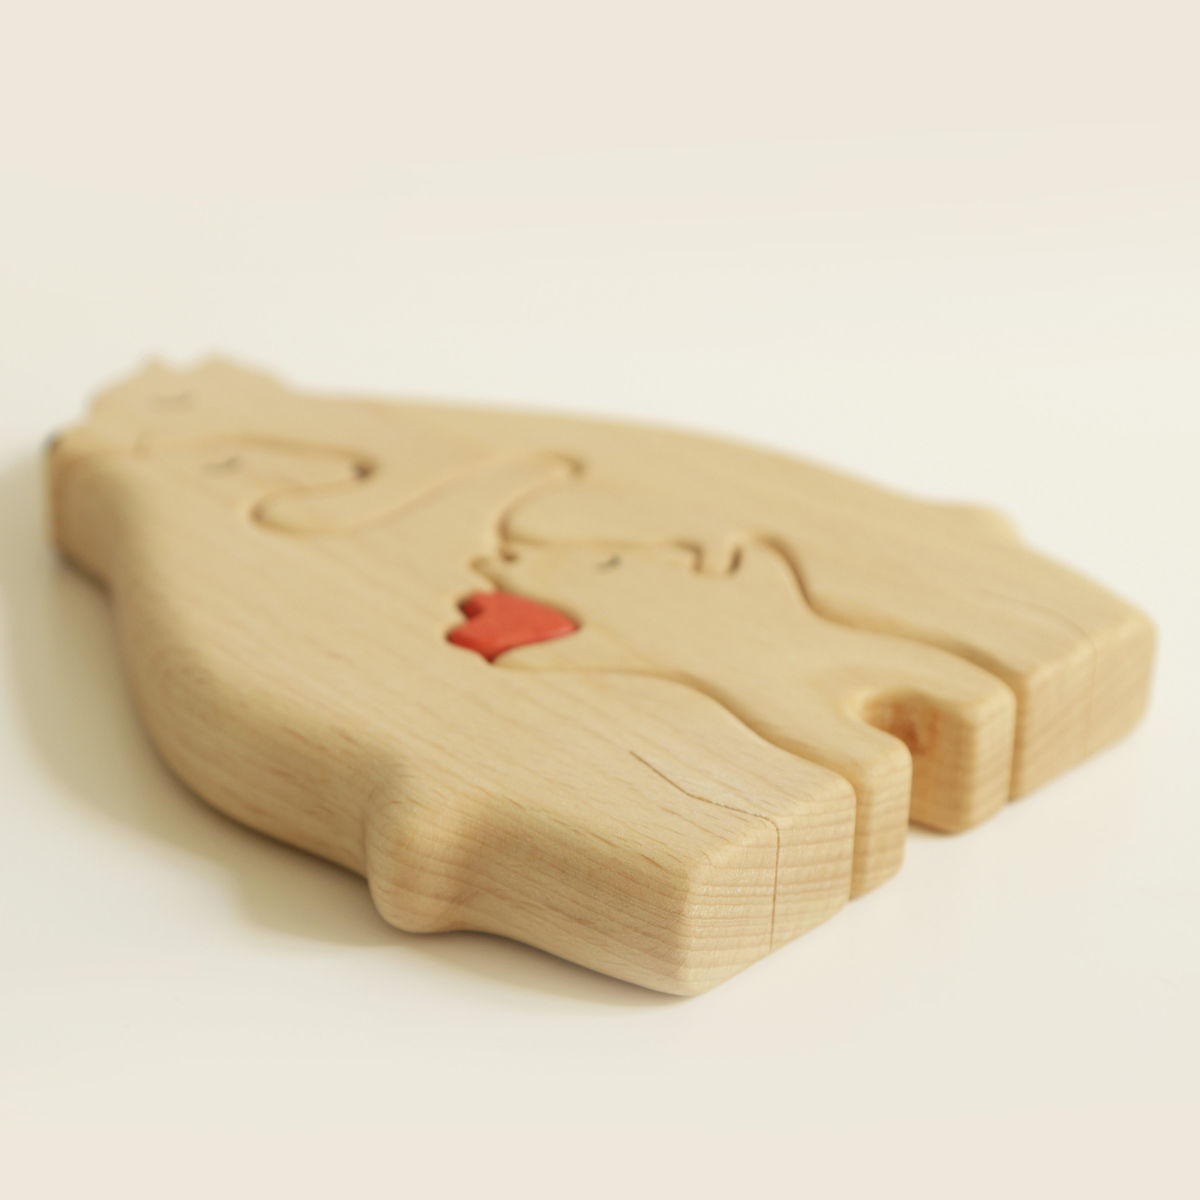 Wooden Bears family puzzle - Up to 6 Kids - Christmas Decor, Family Keepsake Gift, Home Decor_8